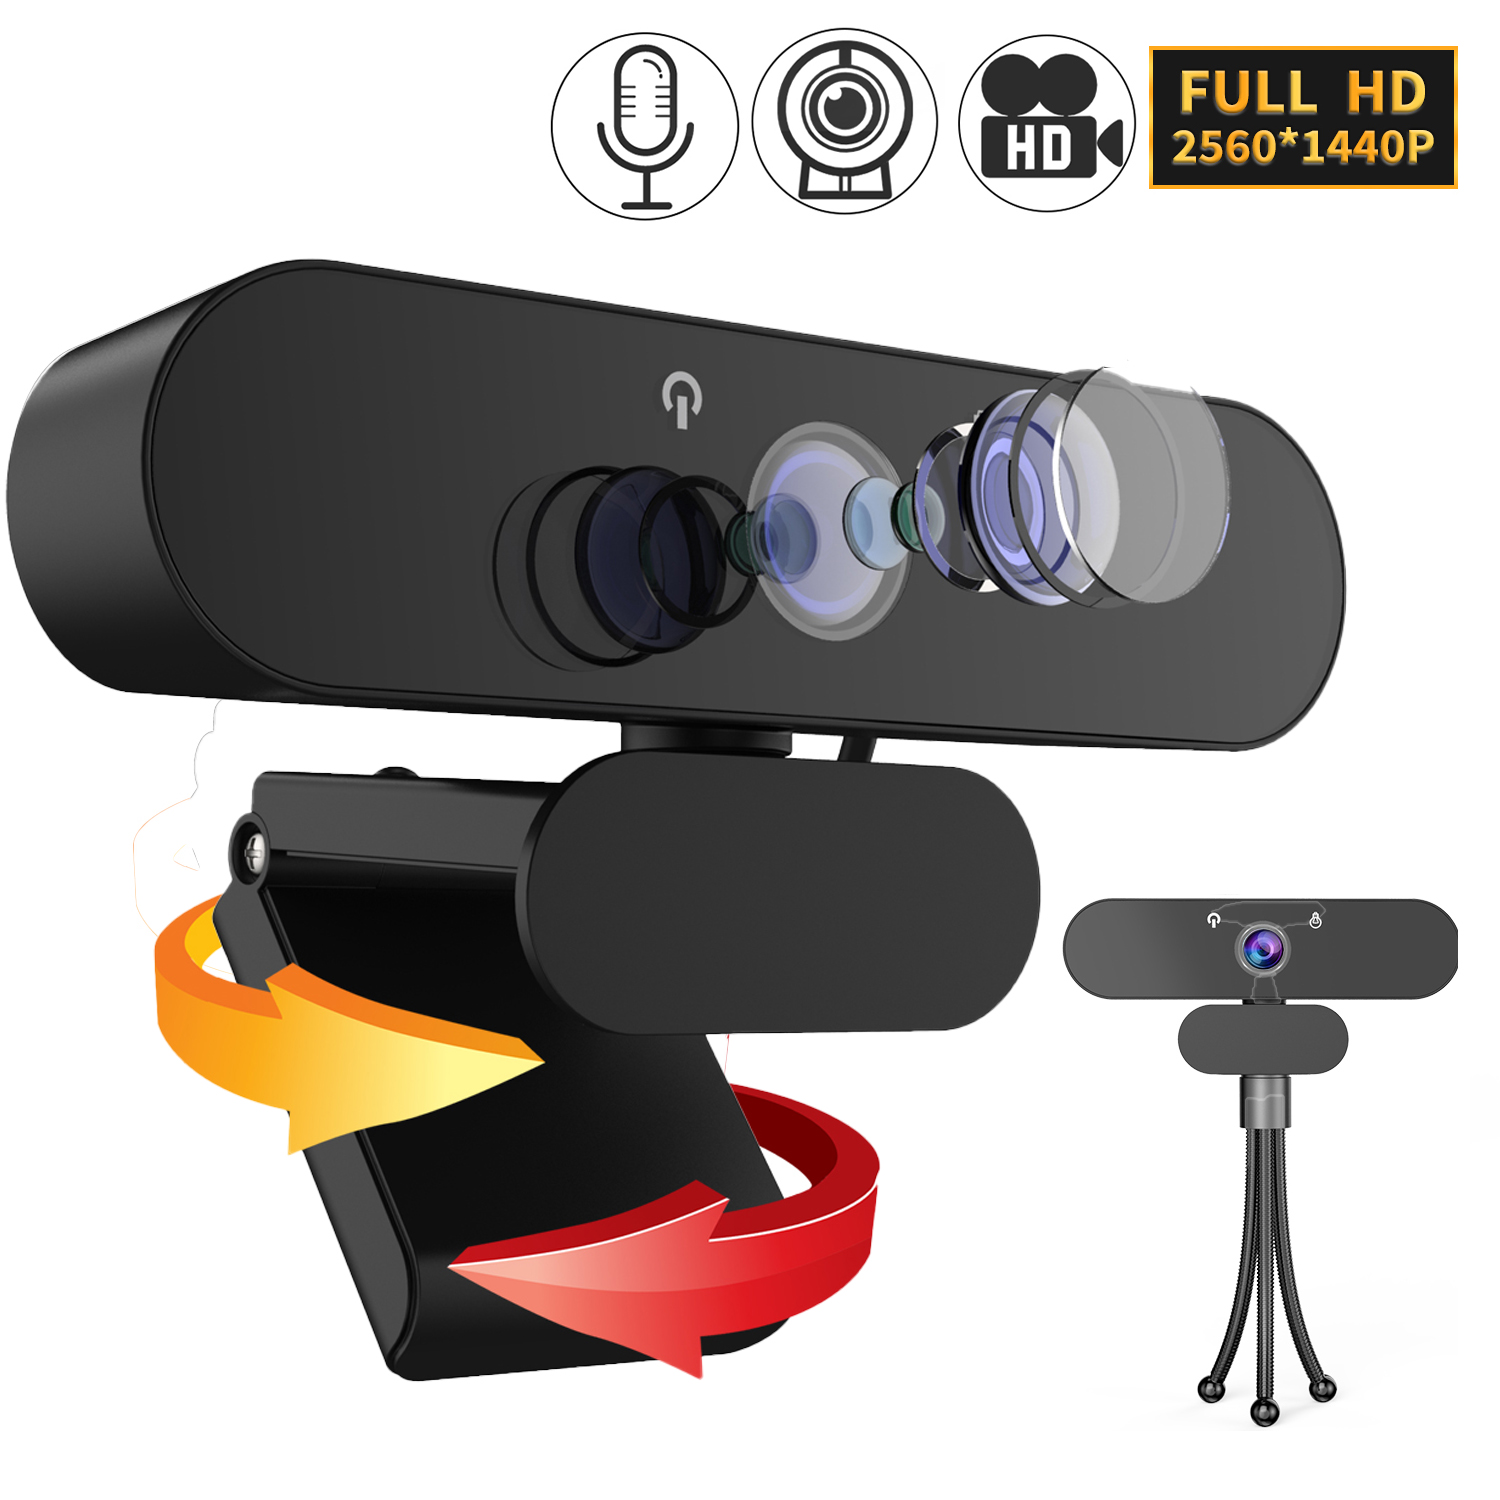 Webcam 1440P HD Computer Camera, Autofocus USB PC Webcam with Microphone, HD Wide-Angle Webcam,Laptop Desktop Full HD Camera Video Webcam,Pro Streaming Webcam for Recording,Calling Conferencing,Gaming - image 1 of 9